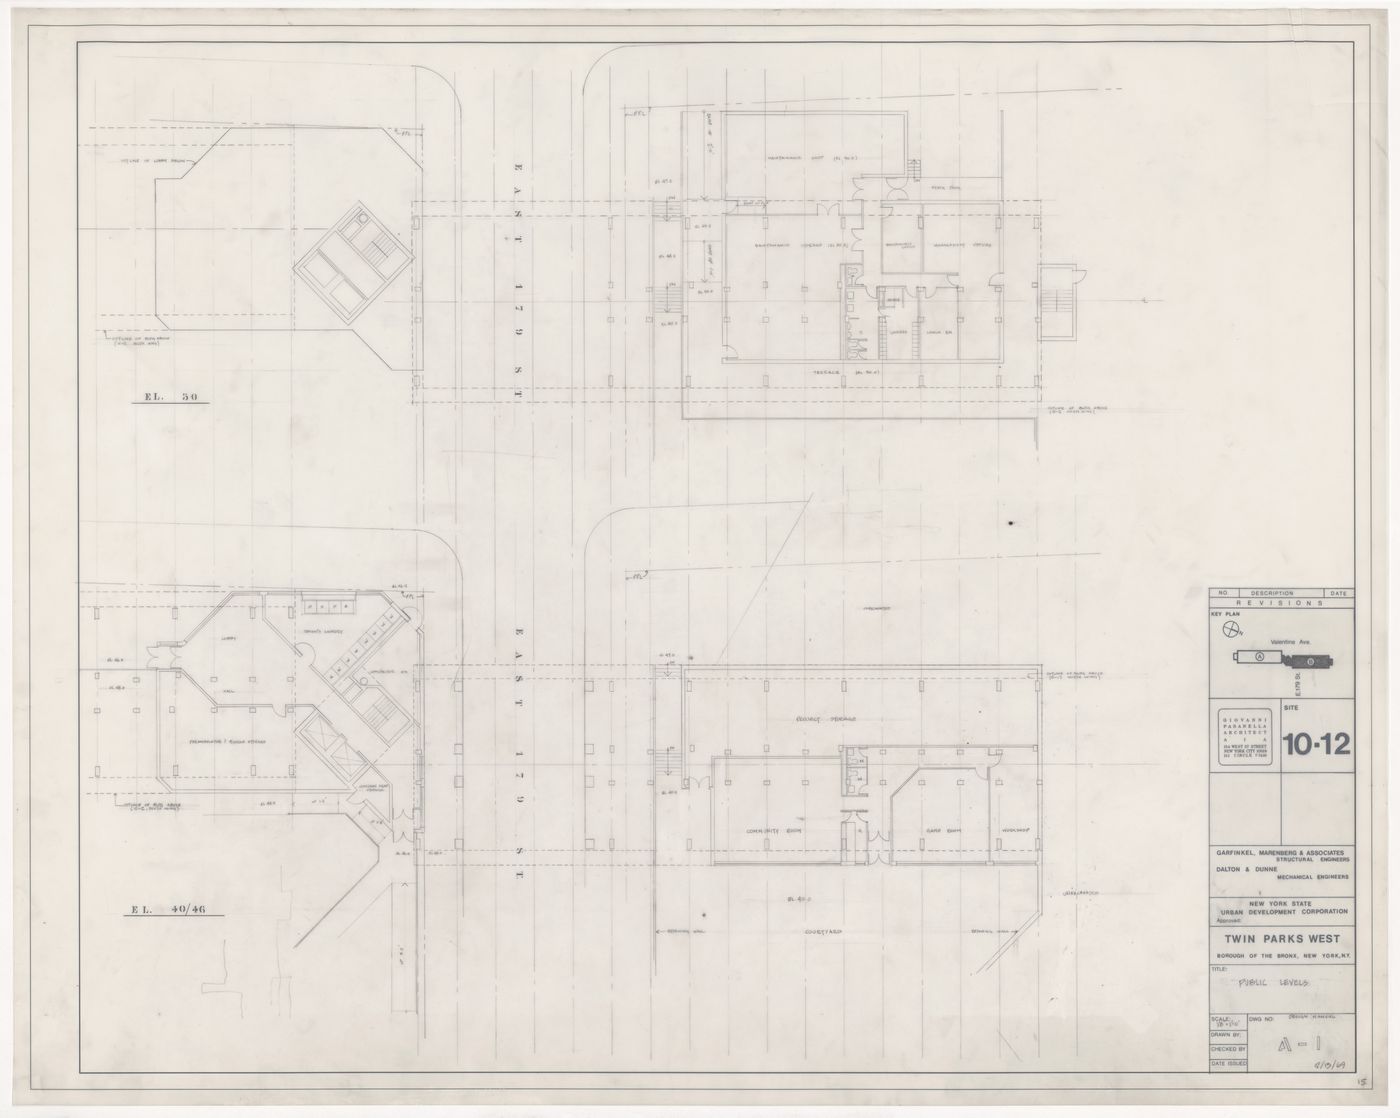 Plans of public levels for Twin Parks West, Site 10-12, Bronx, New York